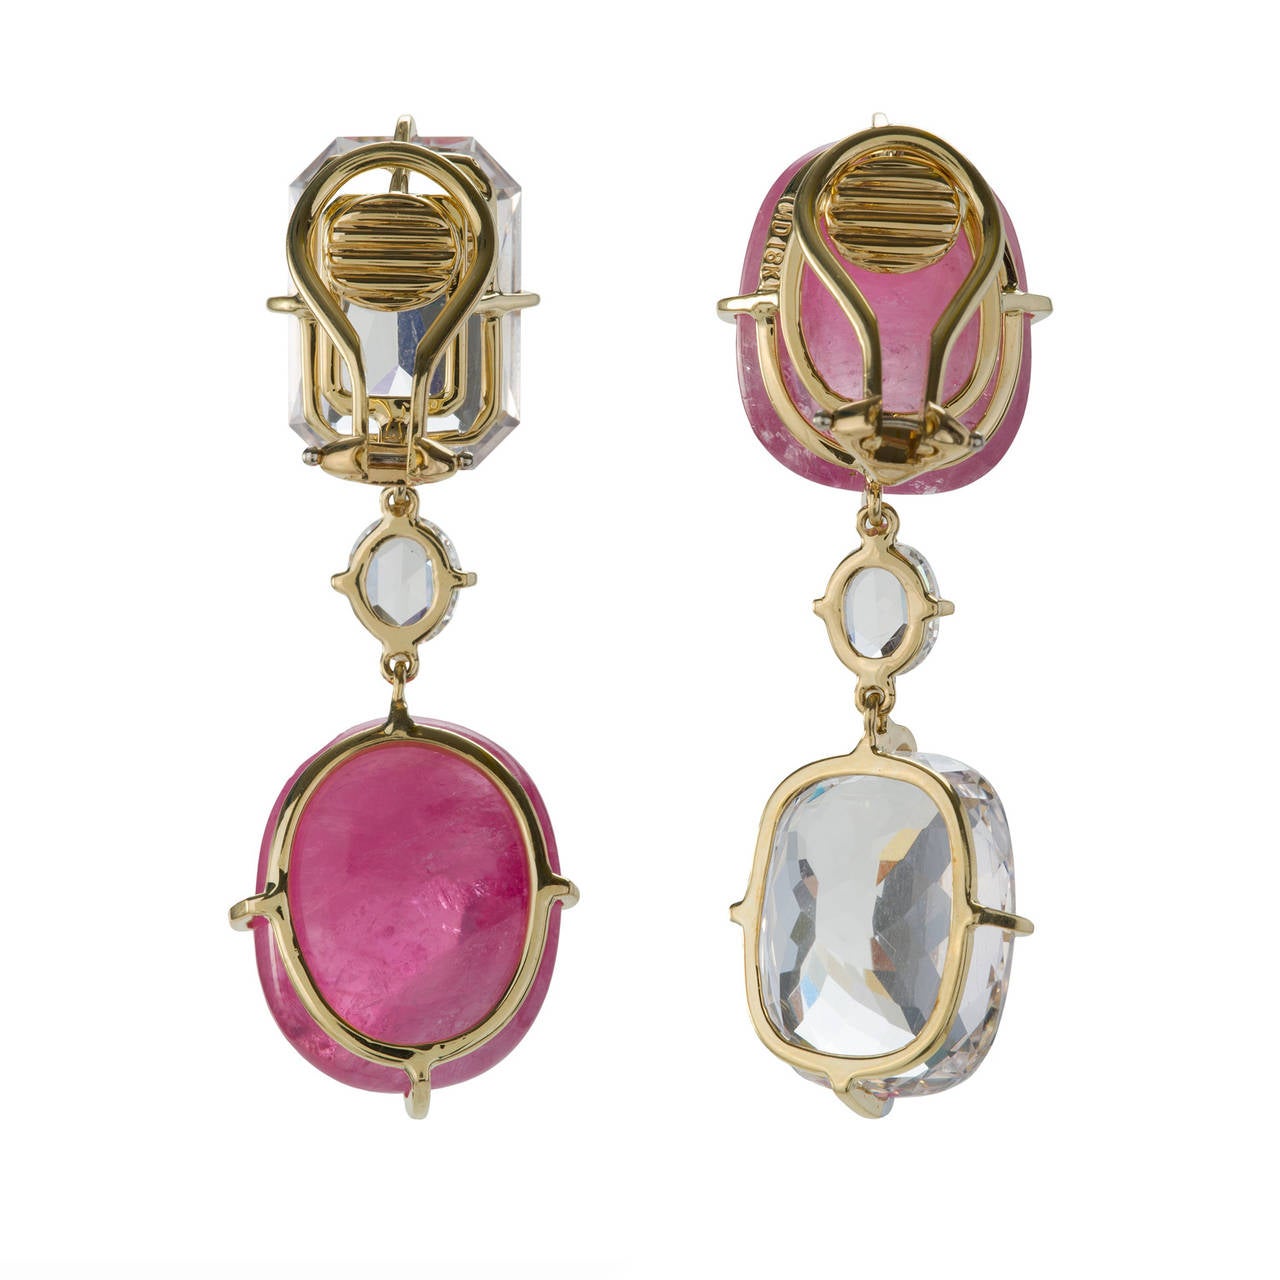 These beautiful earrings feature wonderful bright and charming pink tourmaline cabochons from Burma juxtaposed with large European faceted danburites from Mexico.   The asymmetrical tourmalines are accentuated by .75 ct diamonds. Note the playful